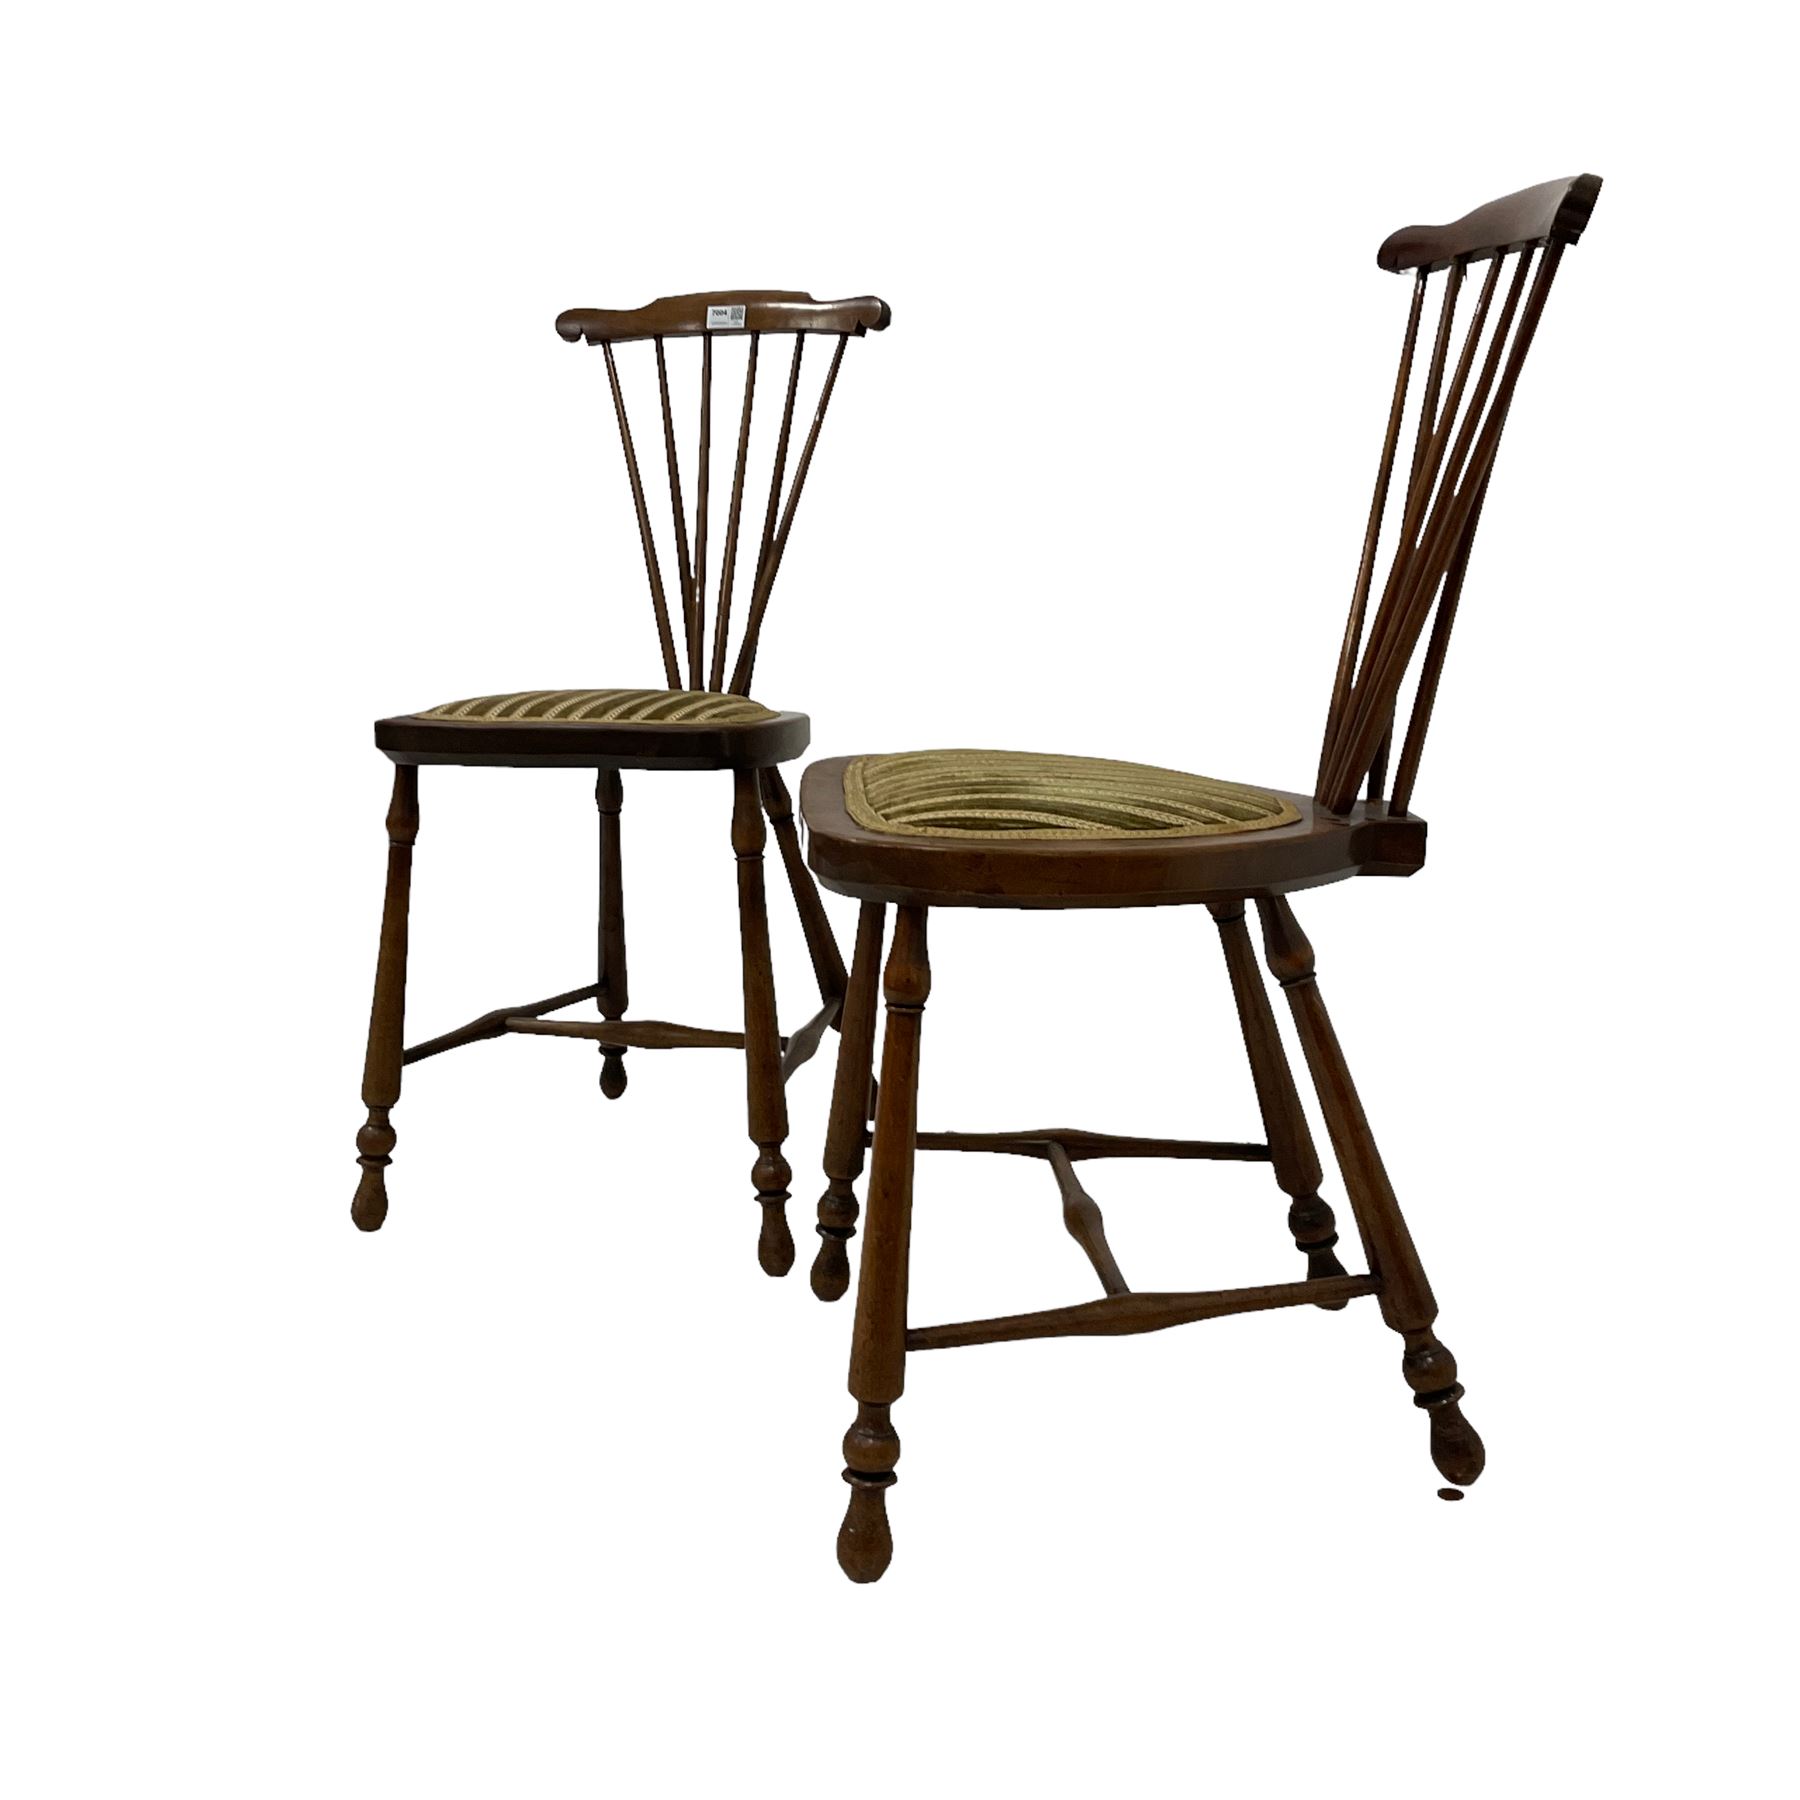 Pair late 19th to early 20th century walnut hall chairs - Image 4 of 4